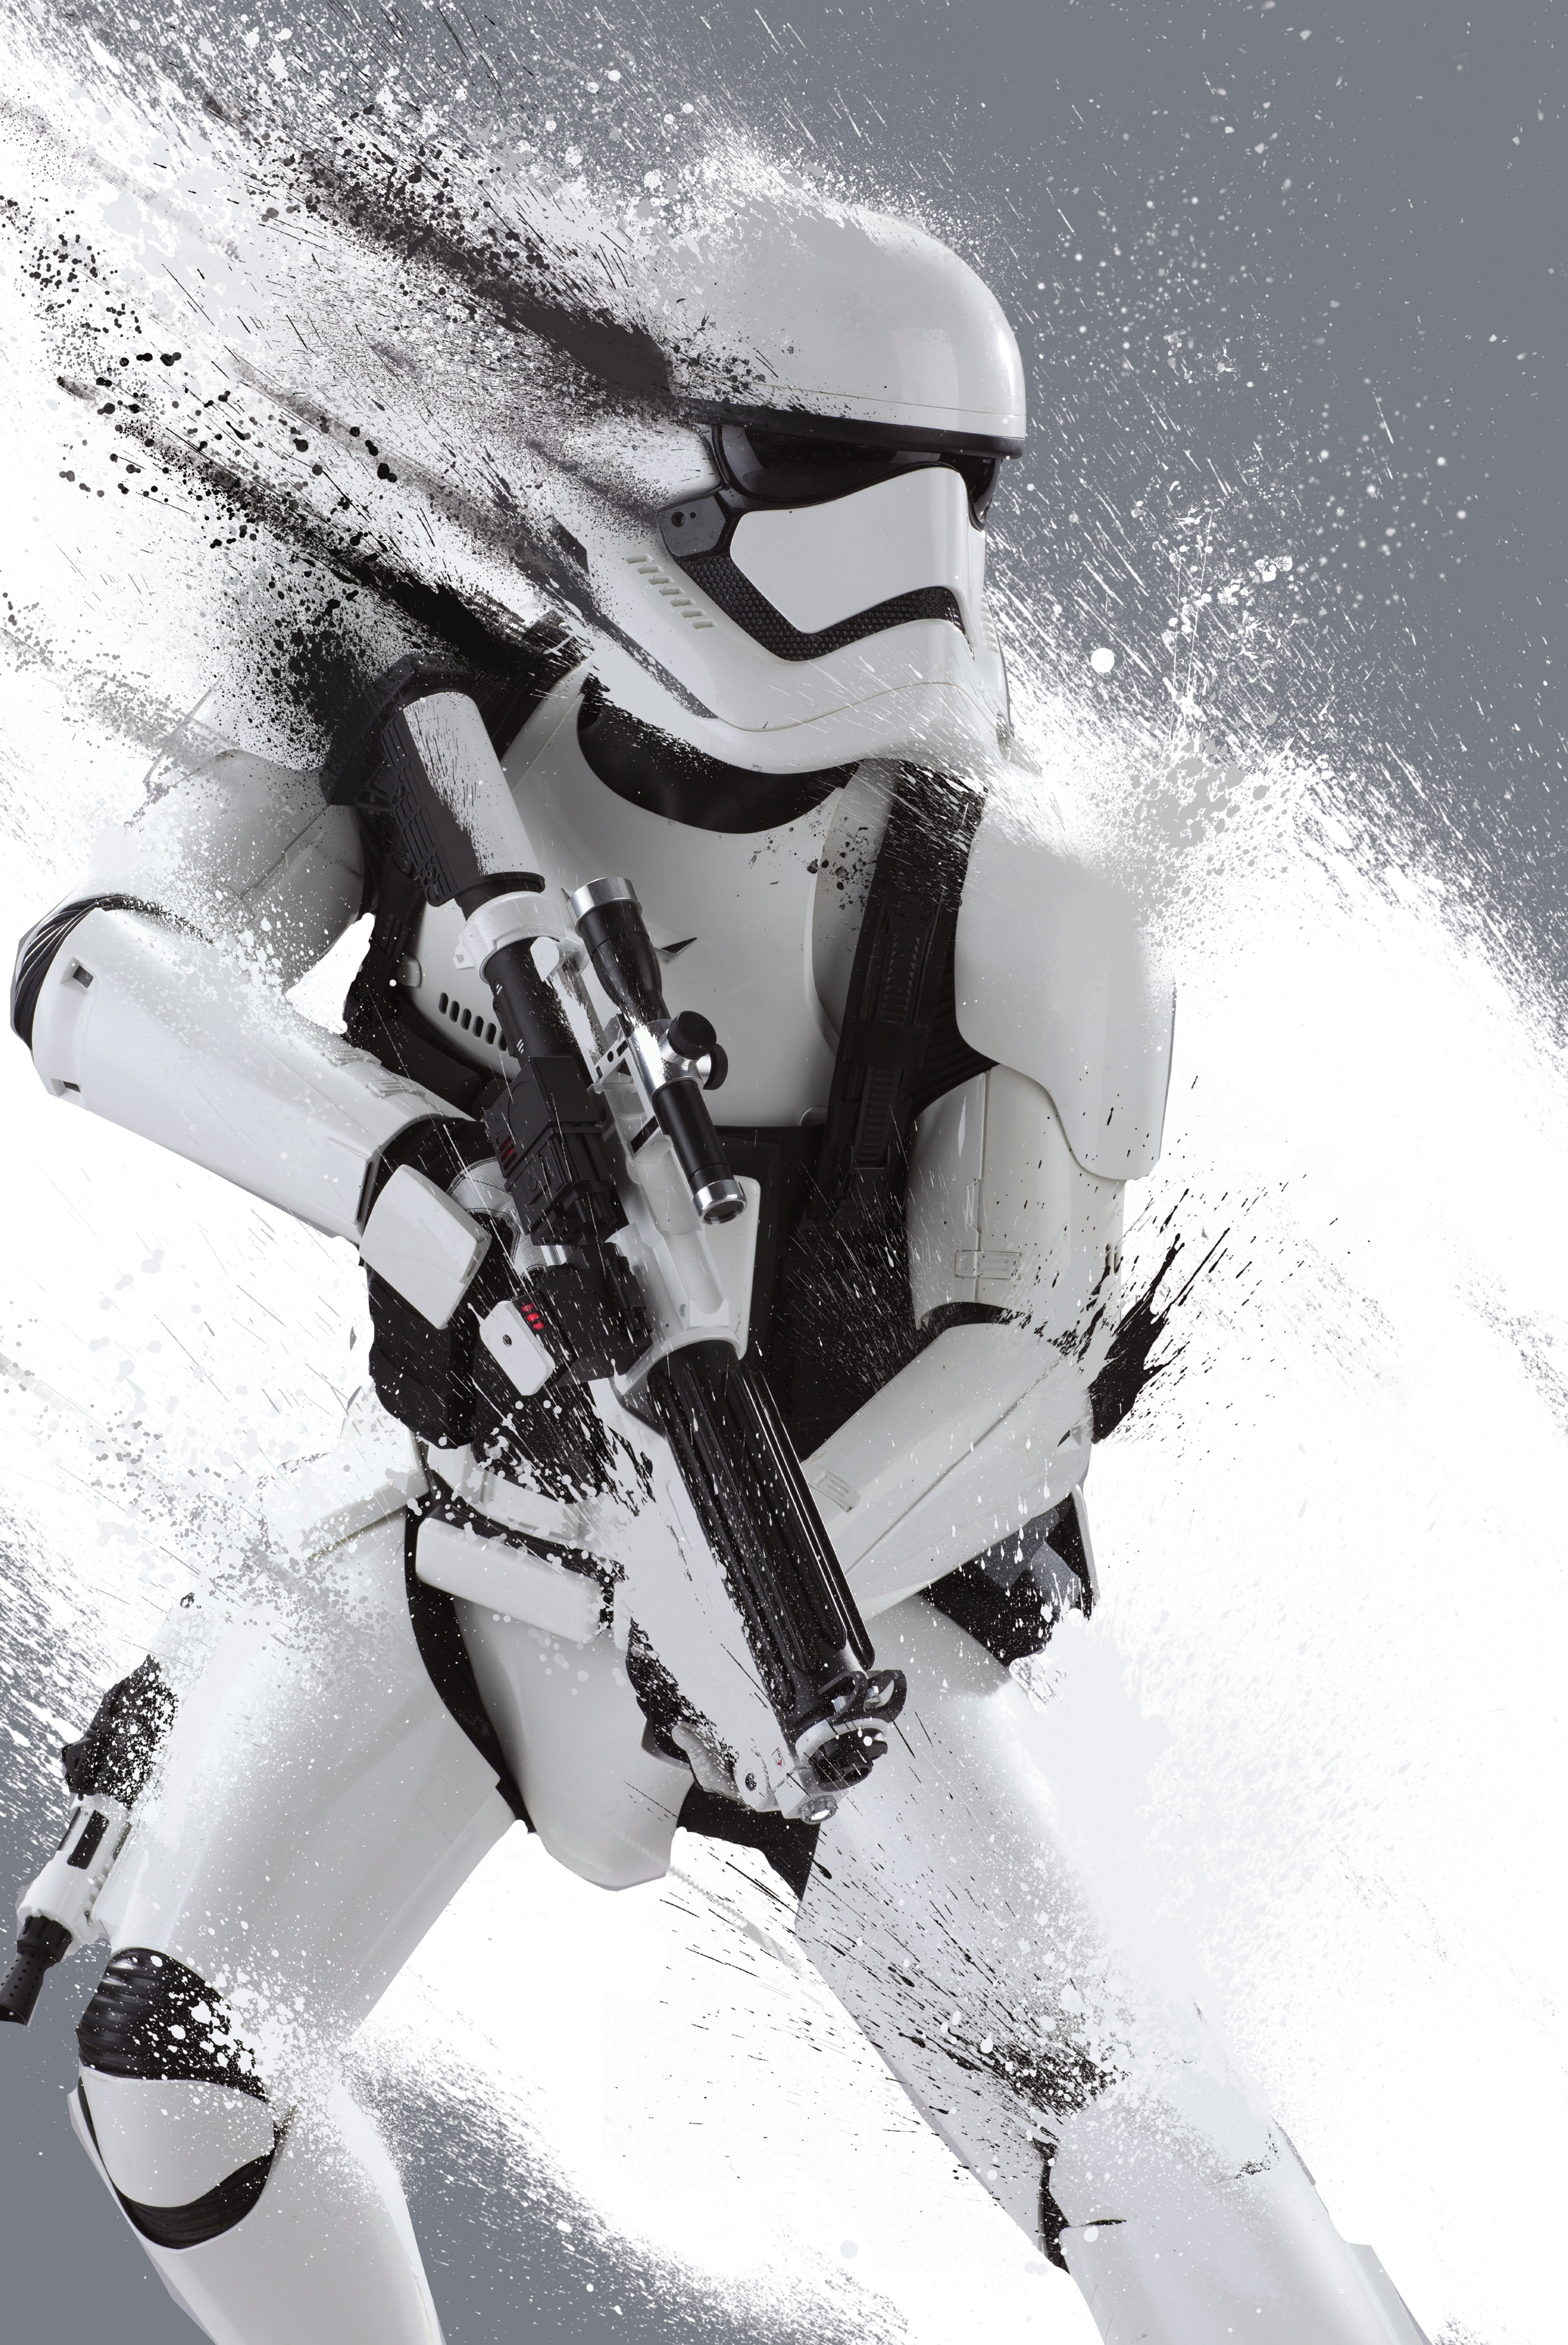 General 6686x10000 Star Wars Star Wars: The Force Awakens movies The First Order blaster First Order Trooper science fiction